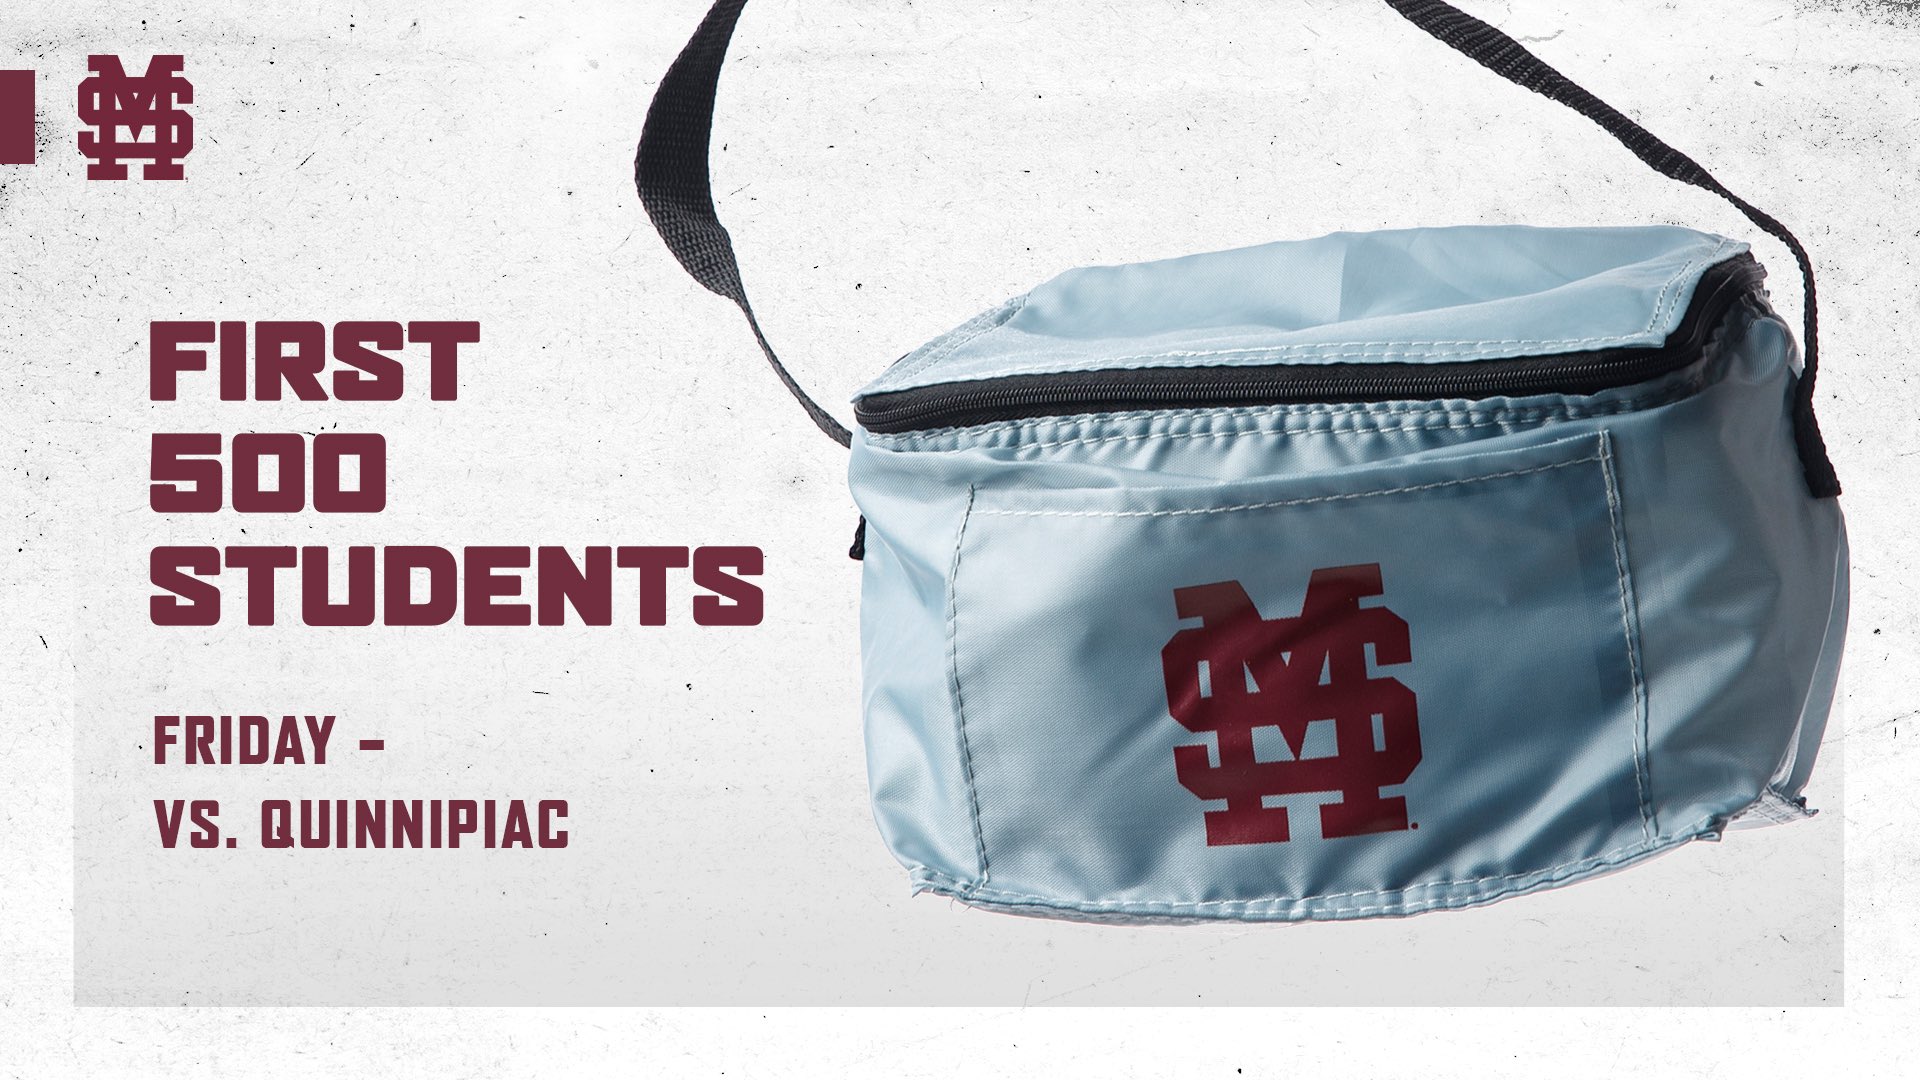 Promotional graphic for MSU baseball cooler giveaway